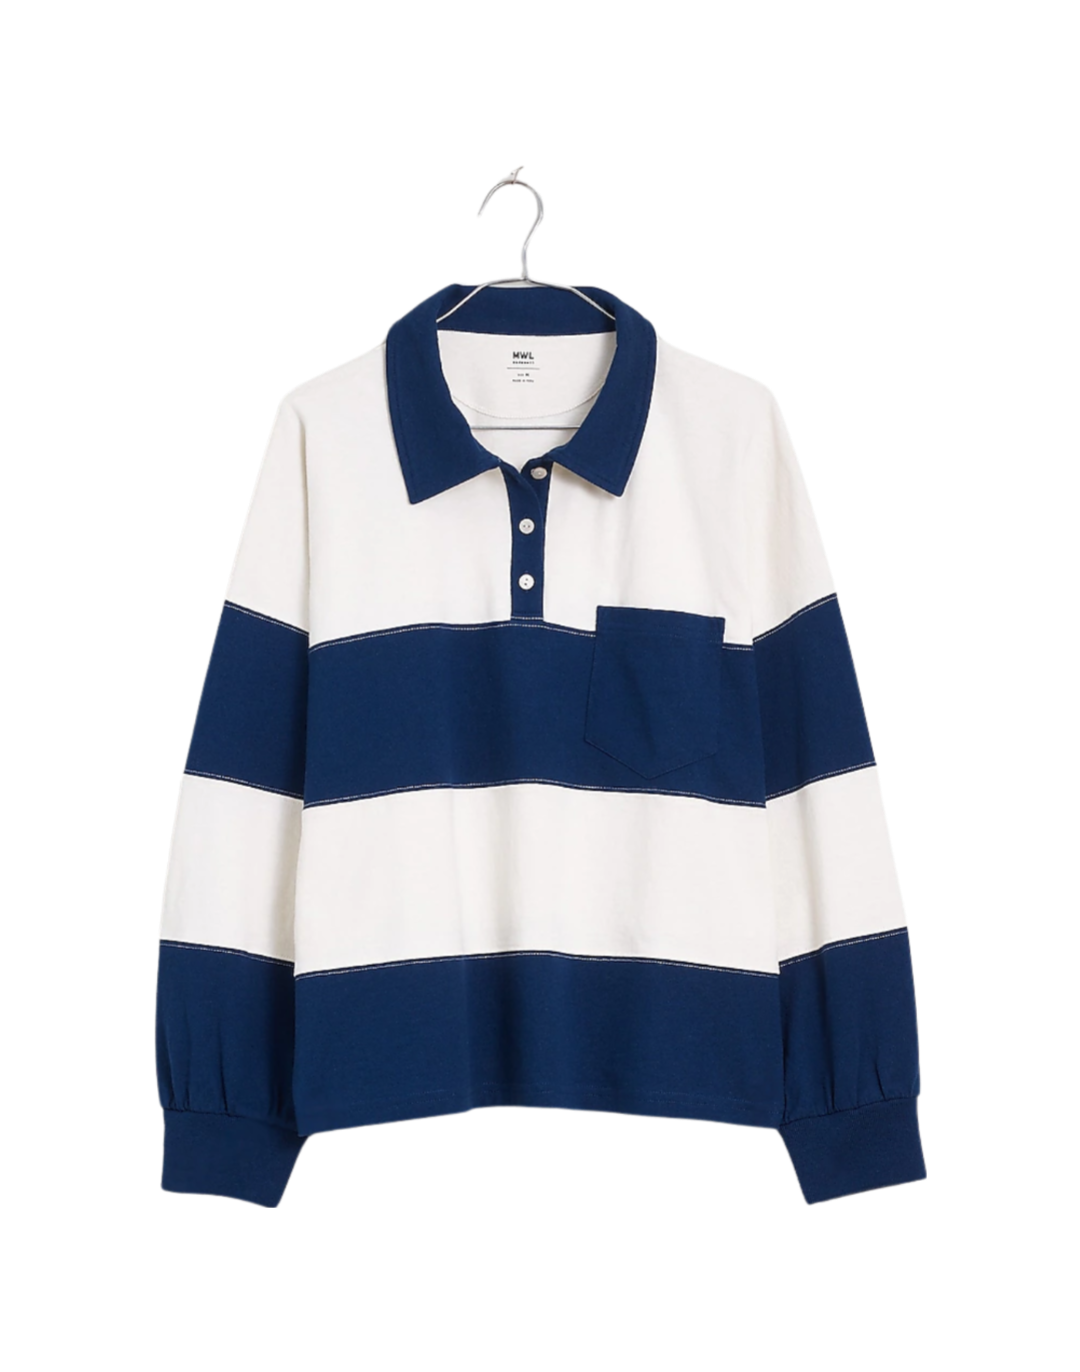 Striped Rugby Polo Shirt